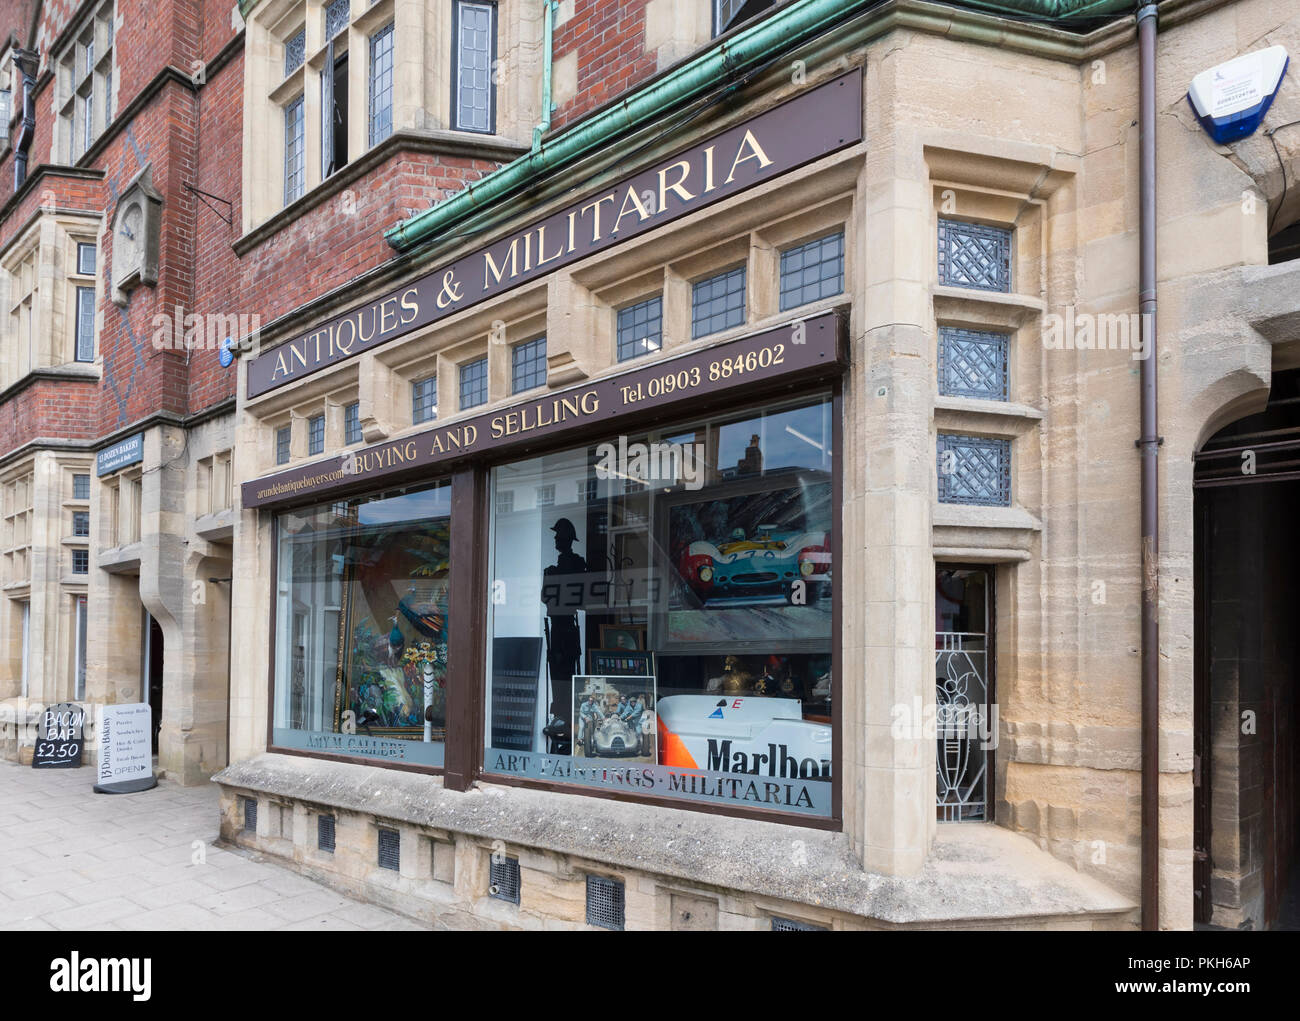 Antiques and Militaria shop in Arundel, West Sussex, England, UK. Stock Photo